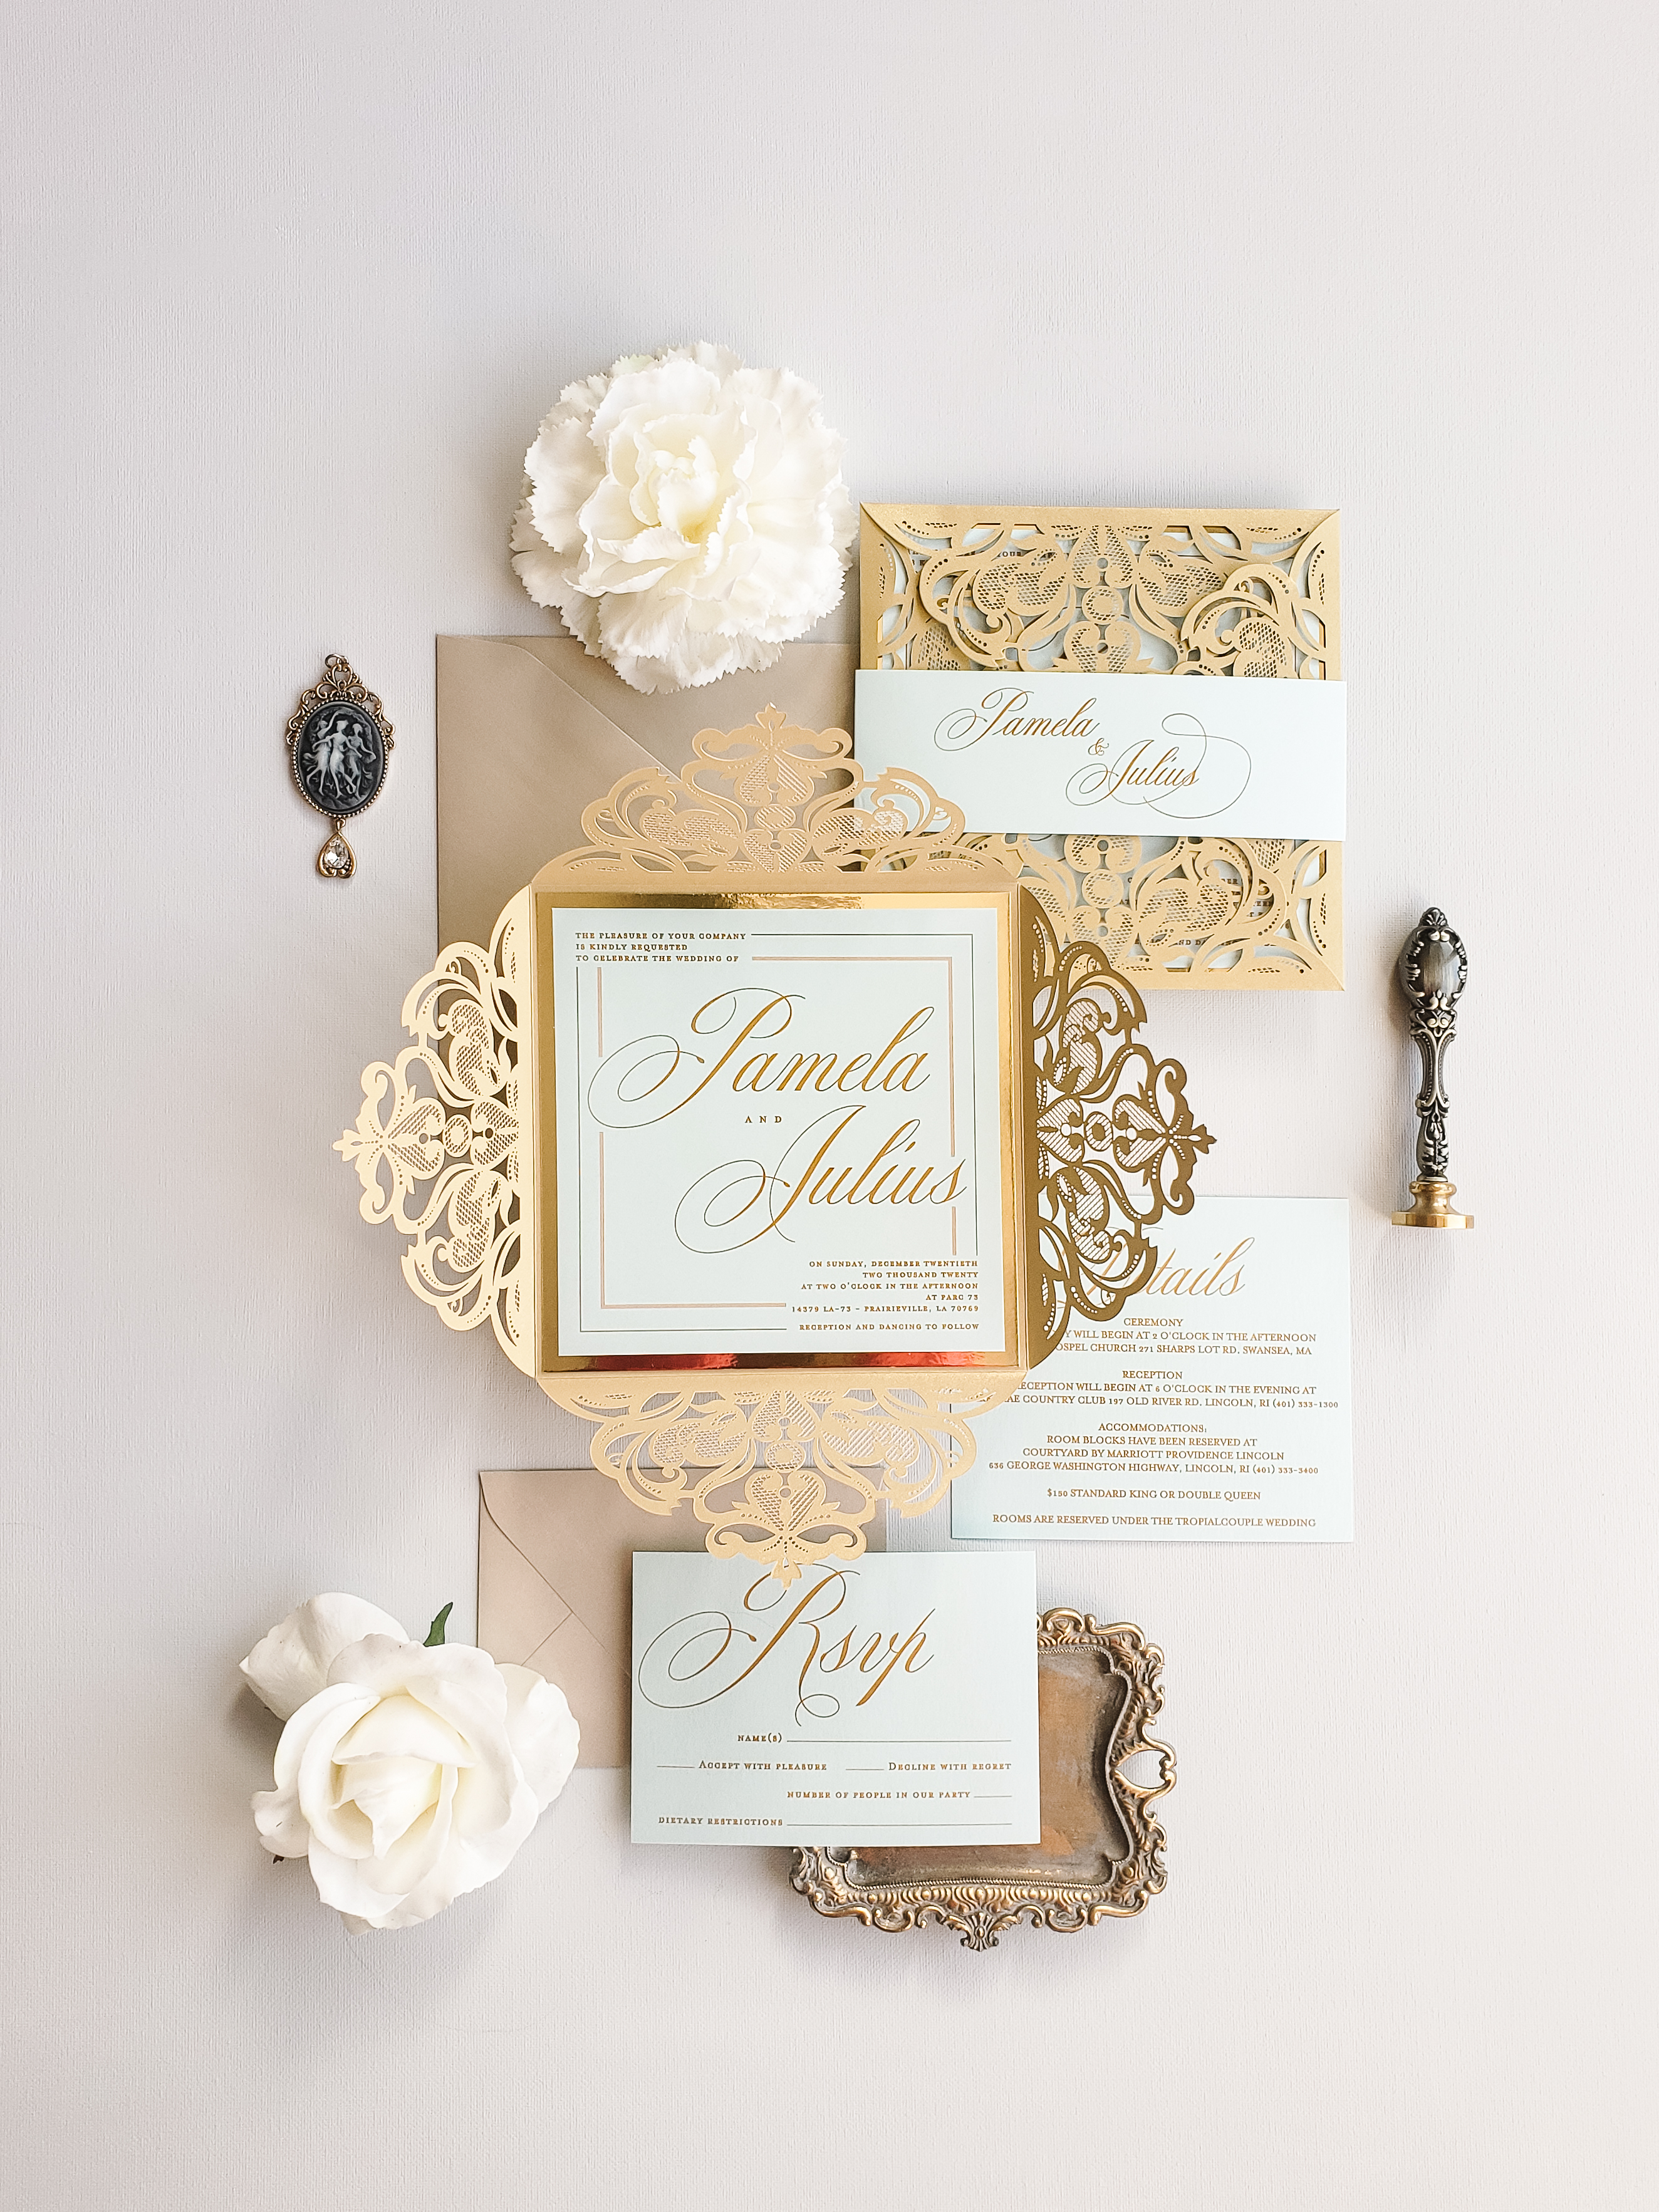 [vc_row][vc_column][vc_column_text]Purchase this listing to get a sample of our Marigold wedding invitation suite.

The sample includes:

• 6